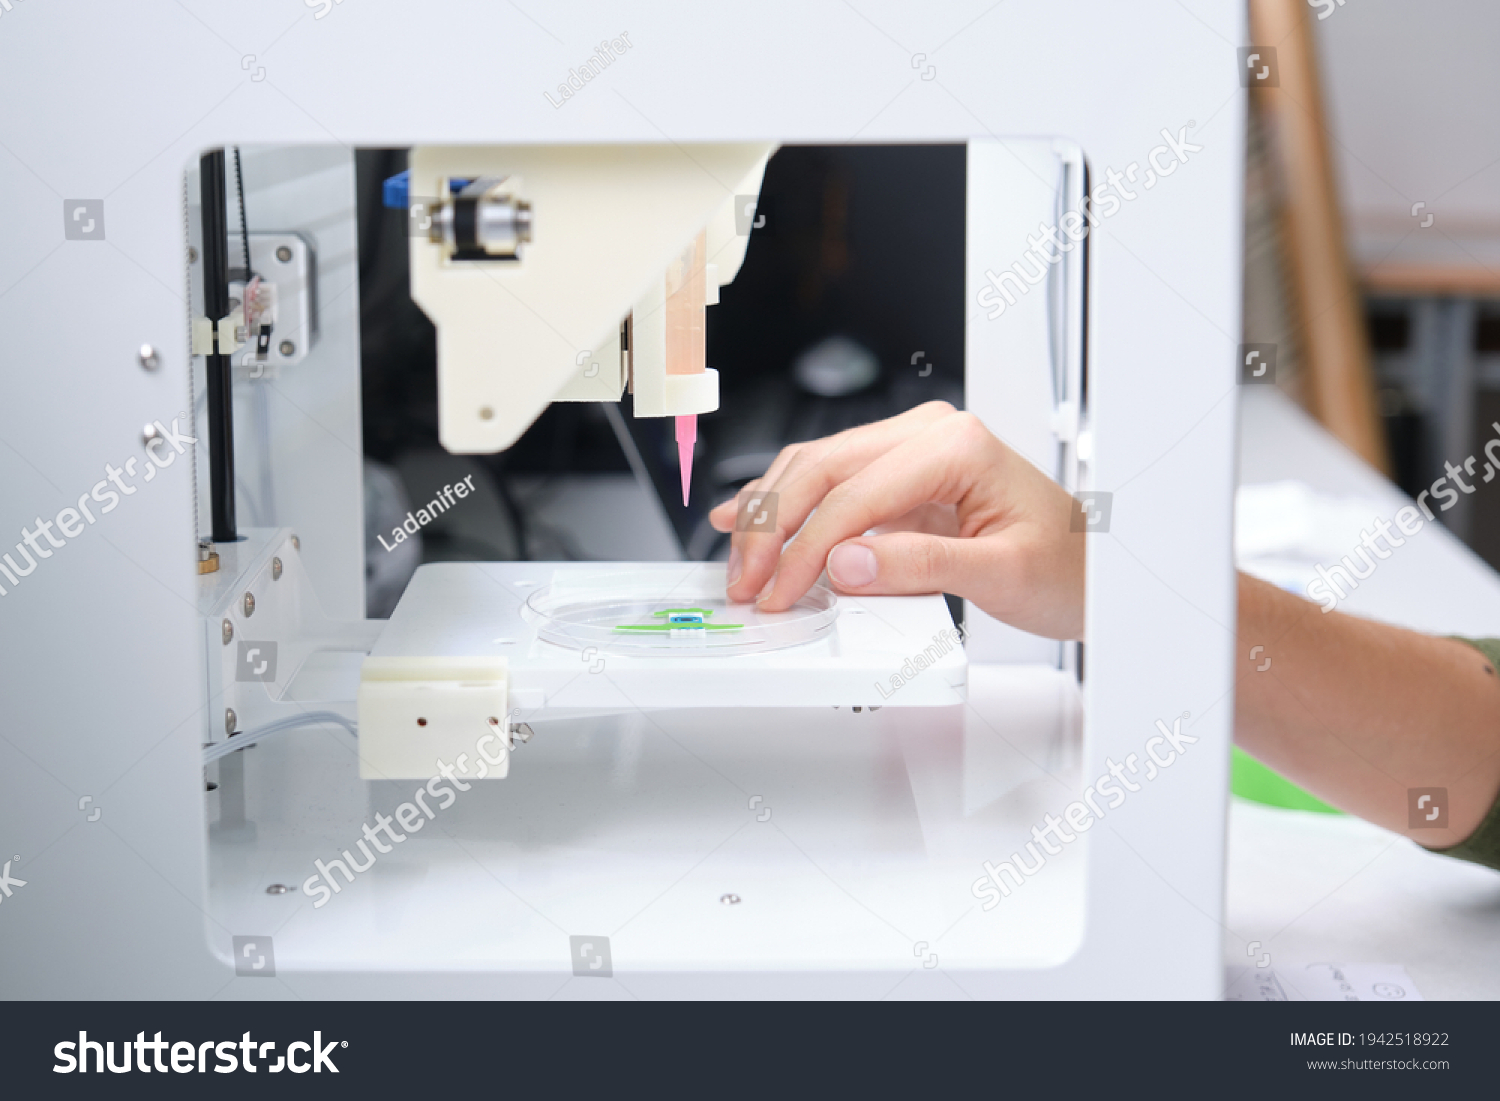 Researcher getting 3D bioprinter ready to 3D print cells onto an electrode. Biomaterials, tissue engineering concepts. #1942518922